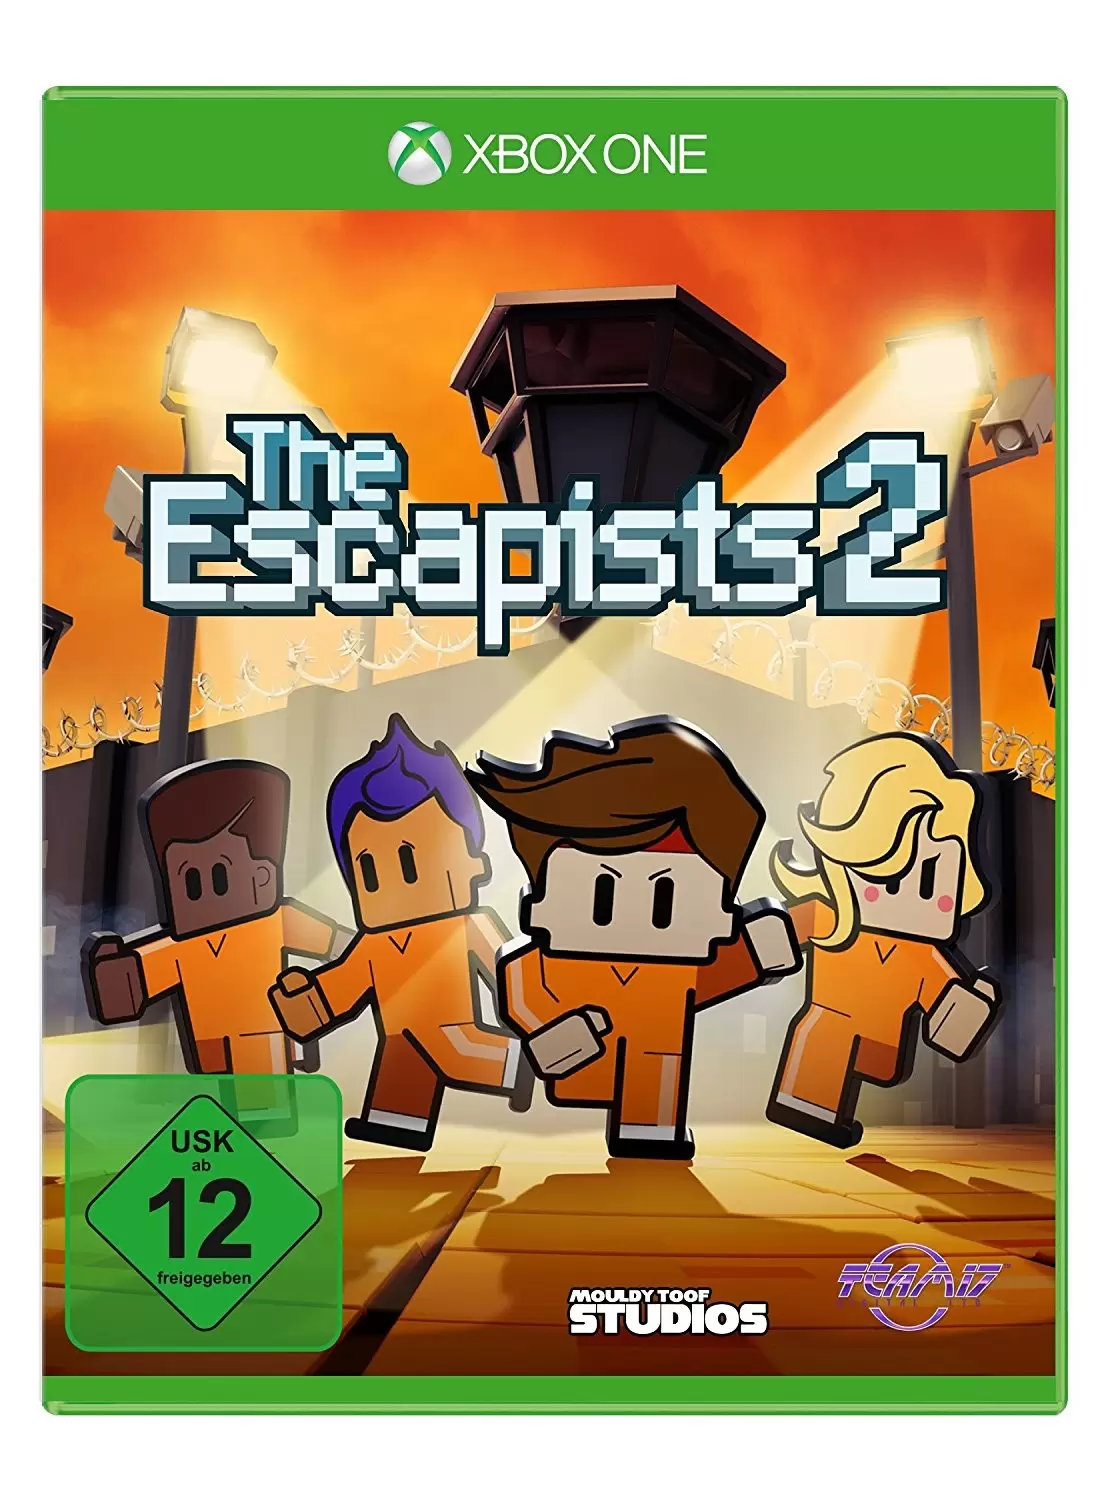 XBOX One Games - The Escapists 2